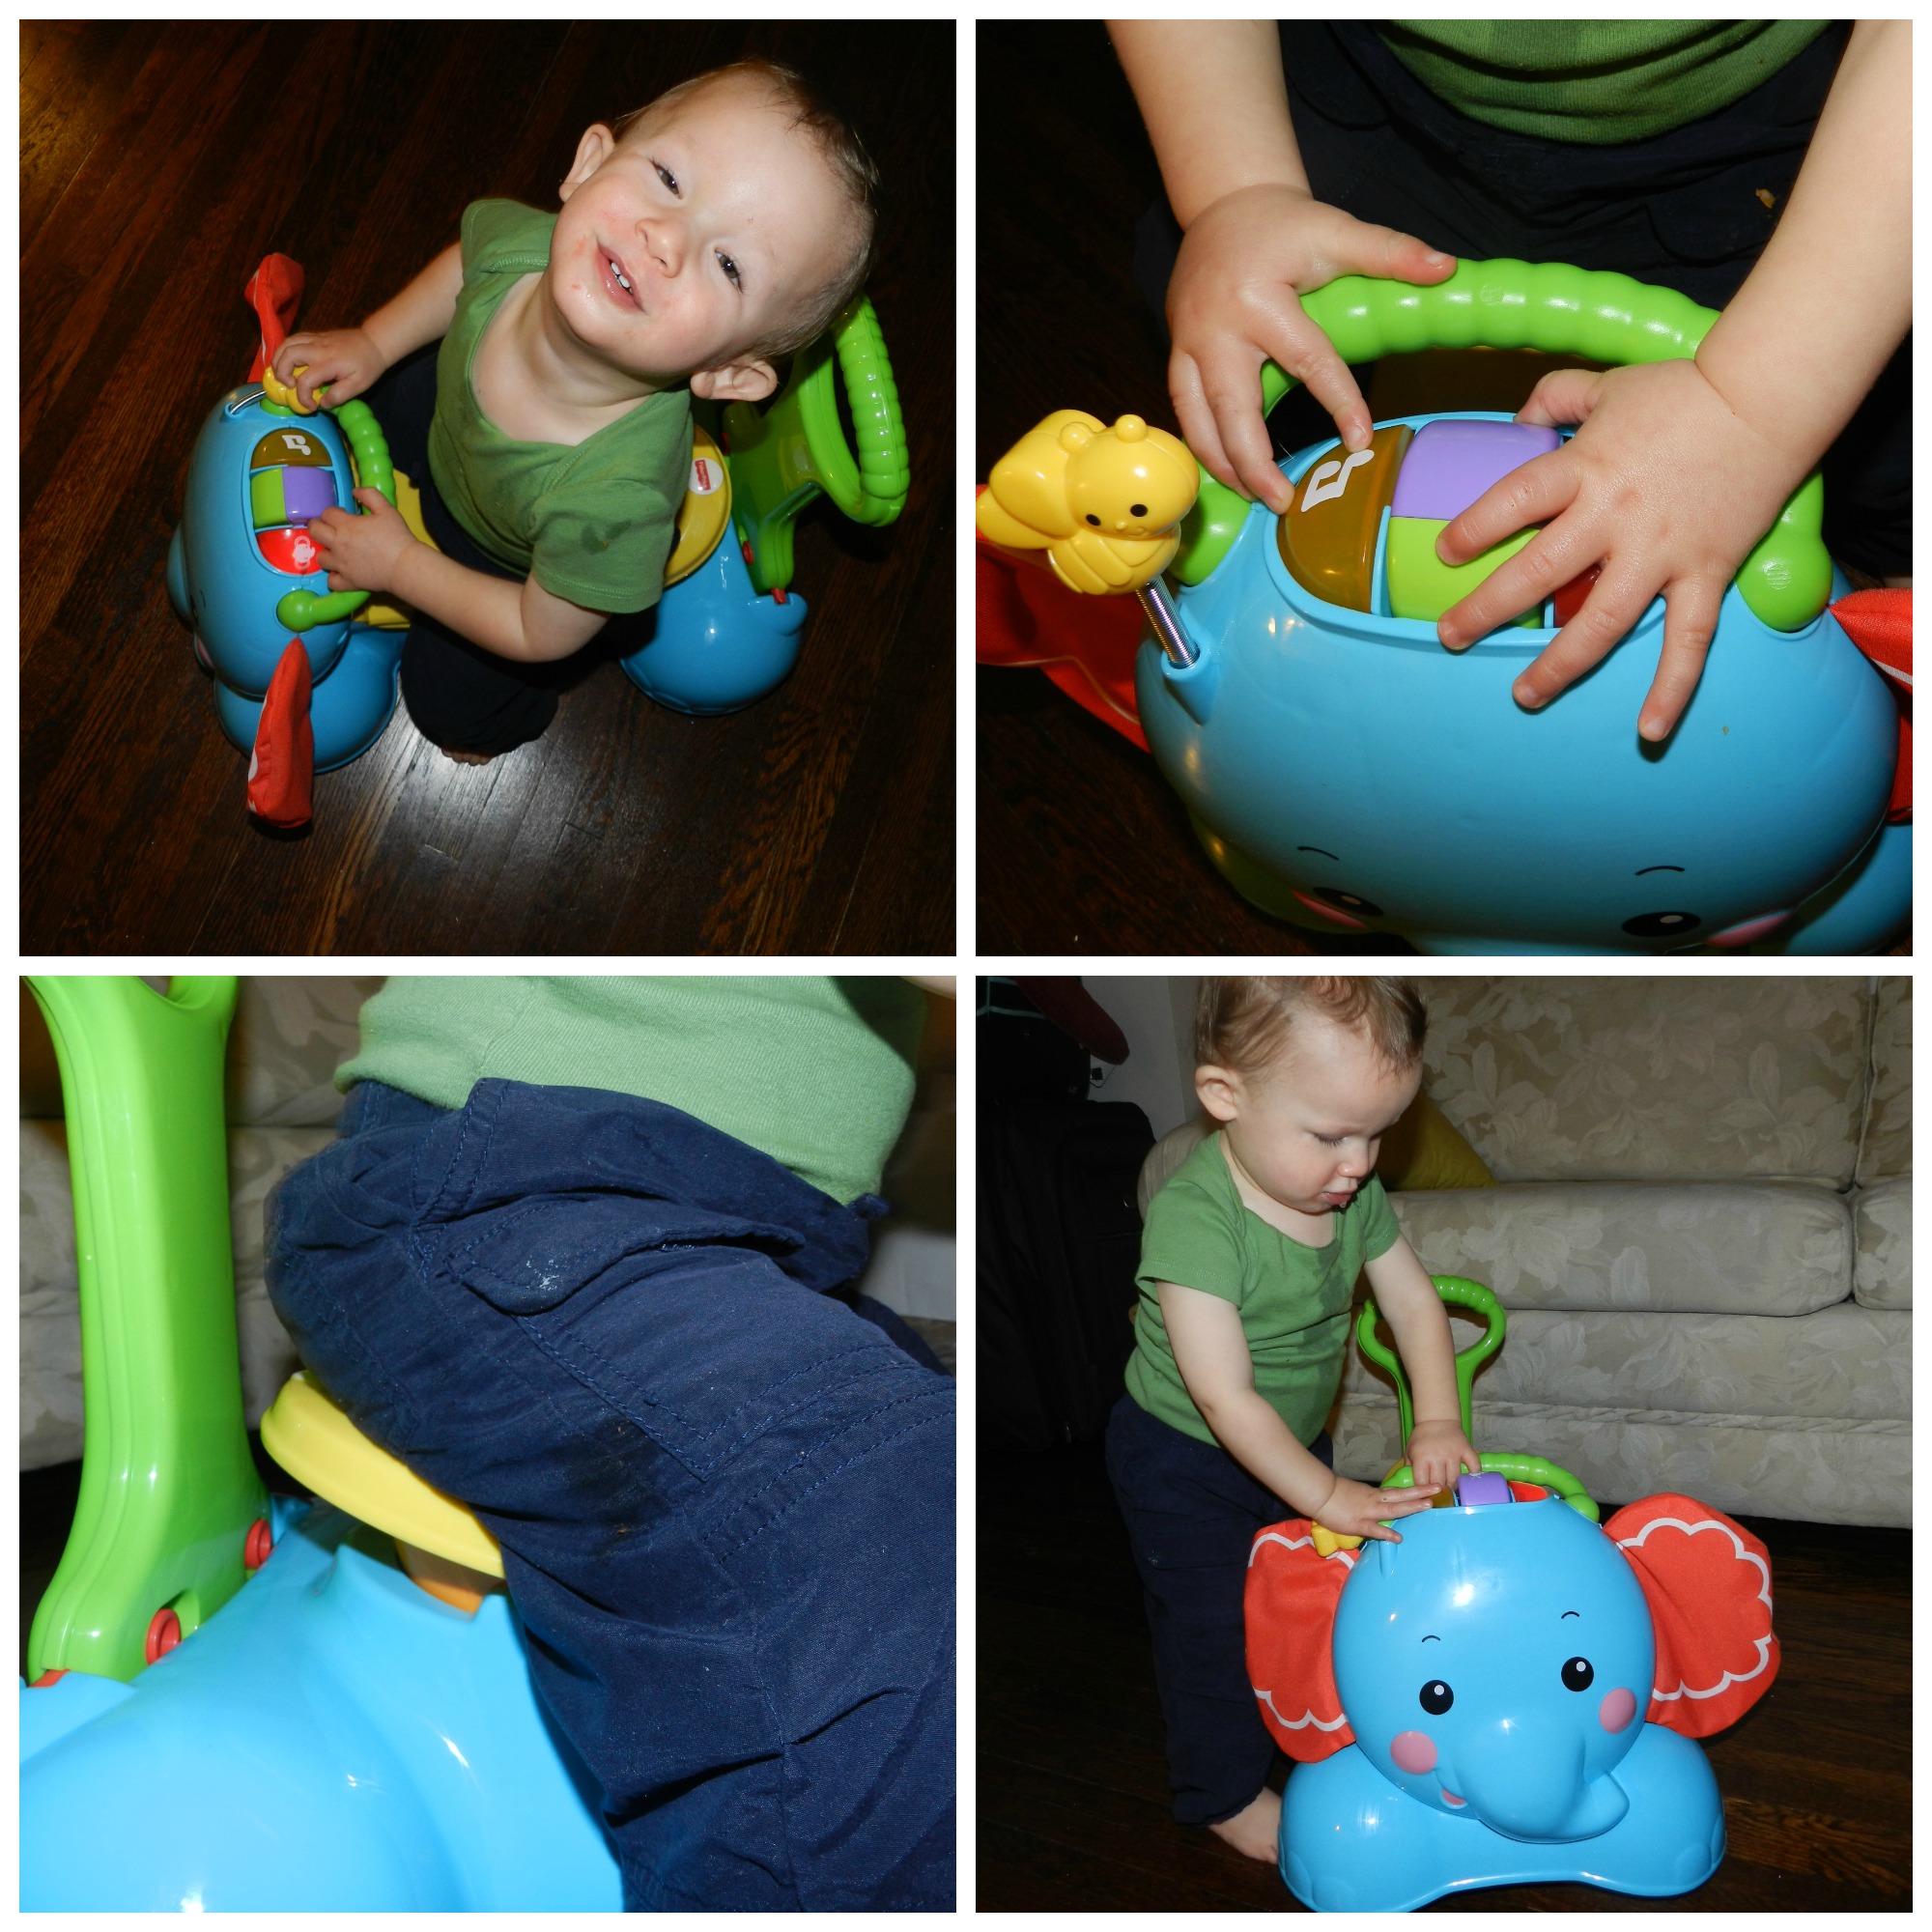 fisher price elephant ride on toy